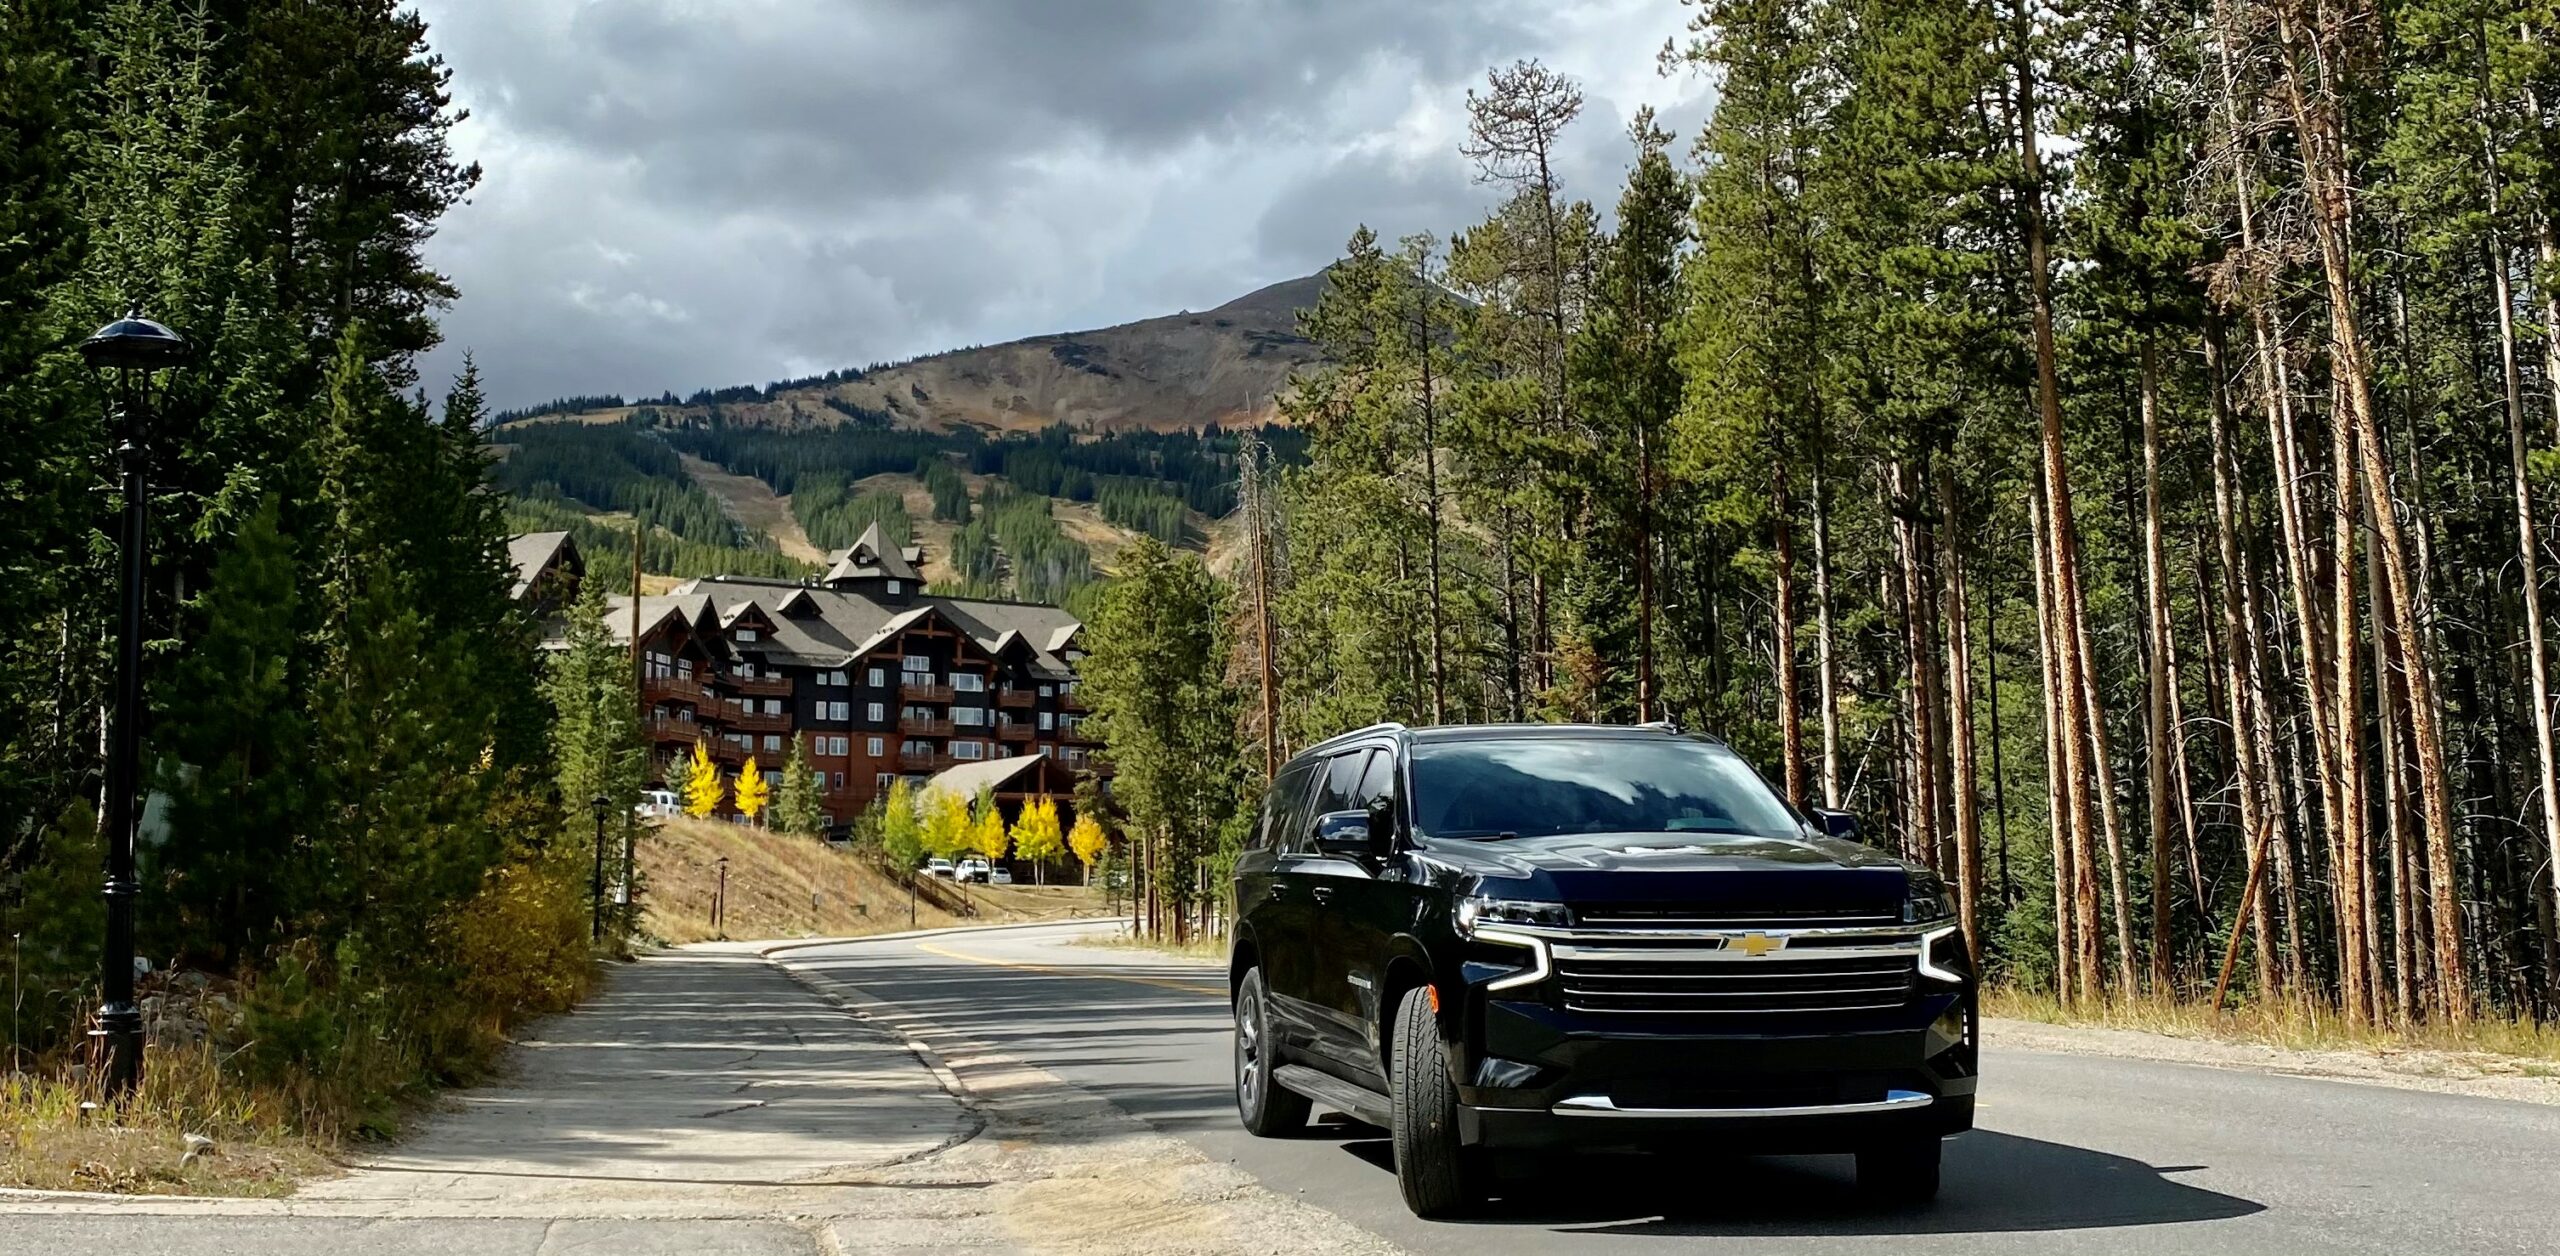 Private Transportation From Hotels in Breckenridge to the Denver Airport